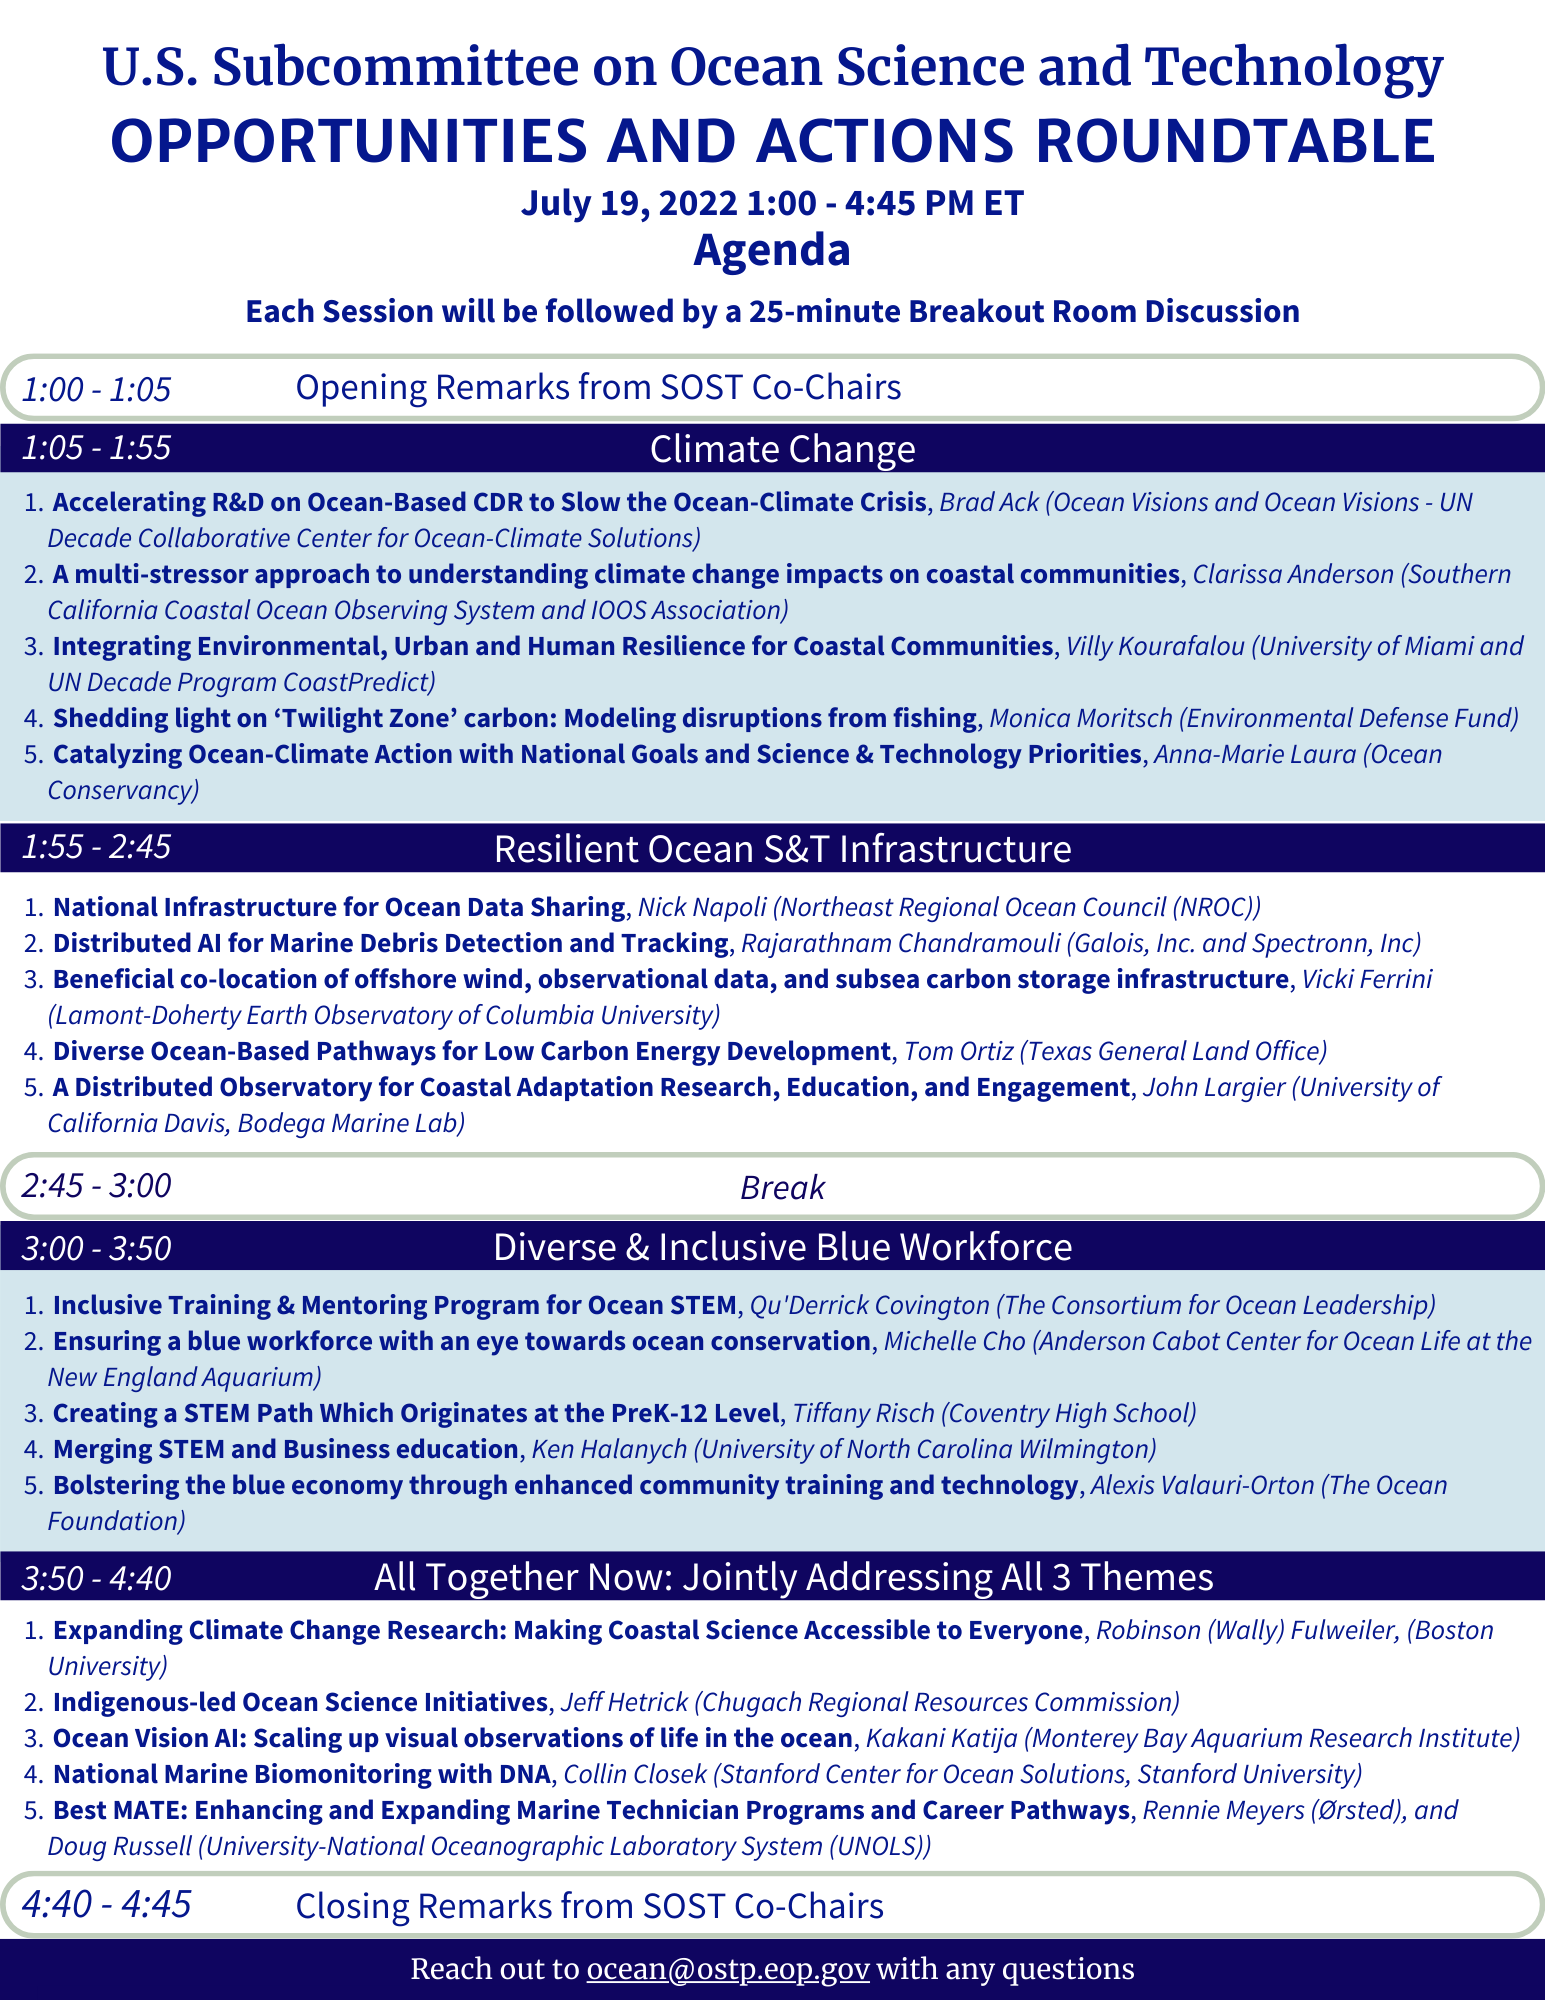 2022 SOST Opportunities and Actions Roundtable Agenda